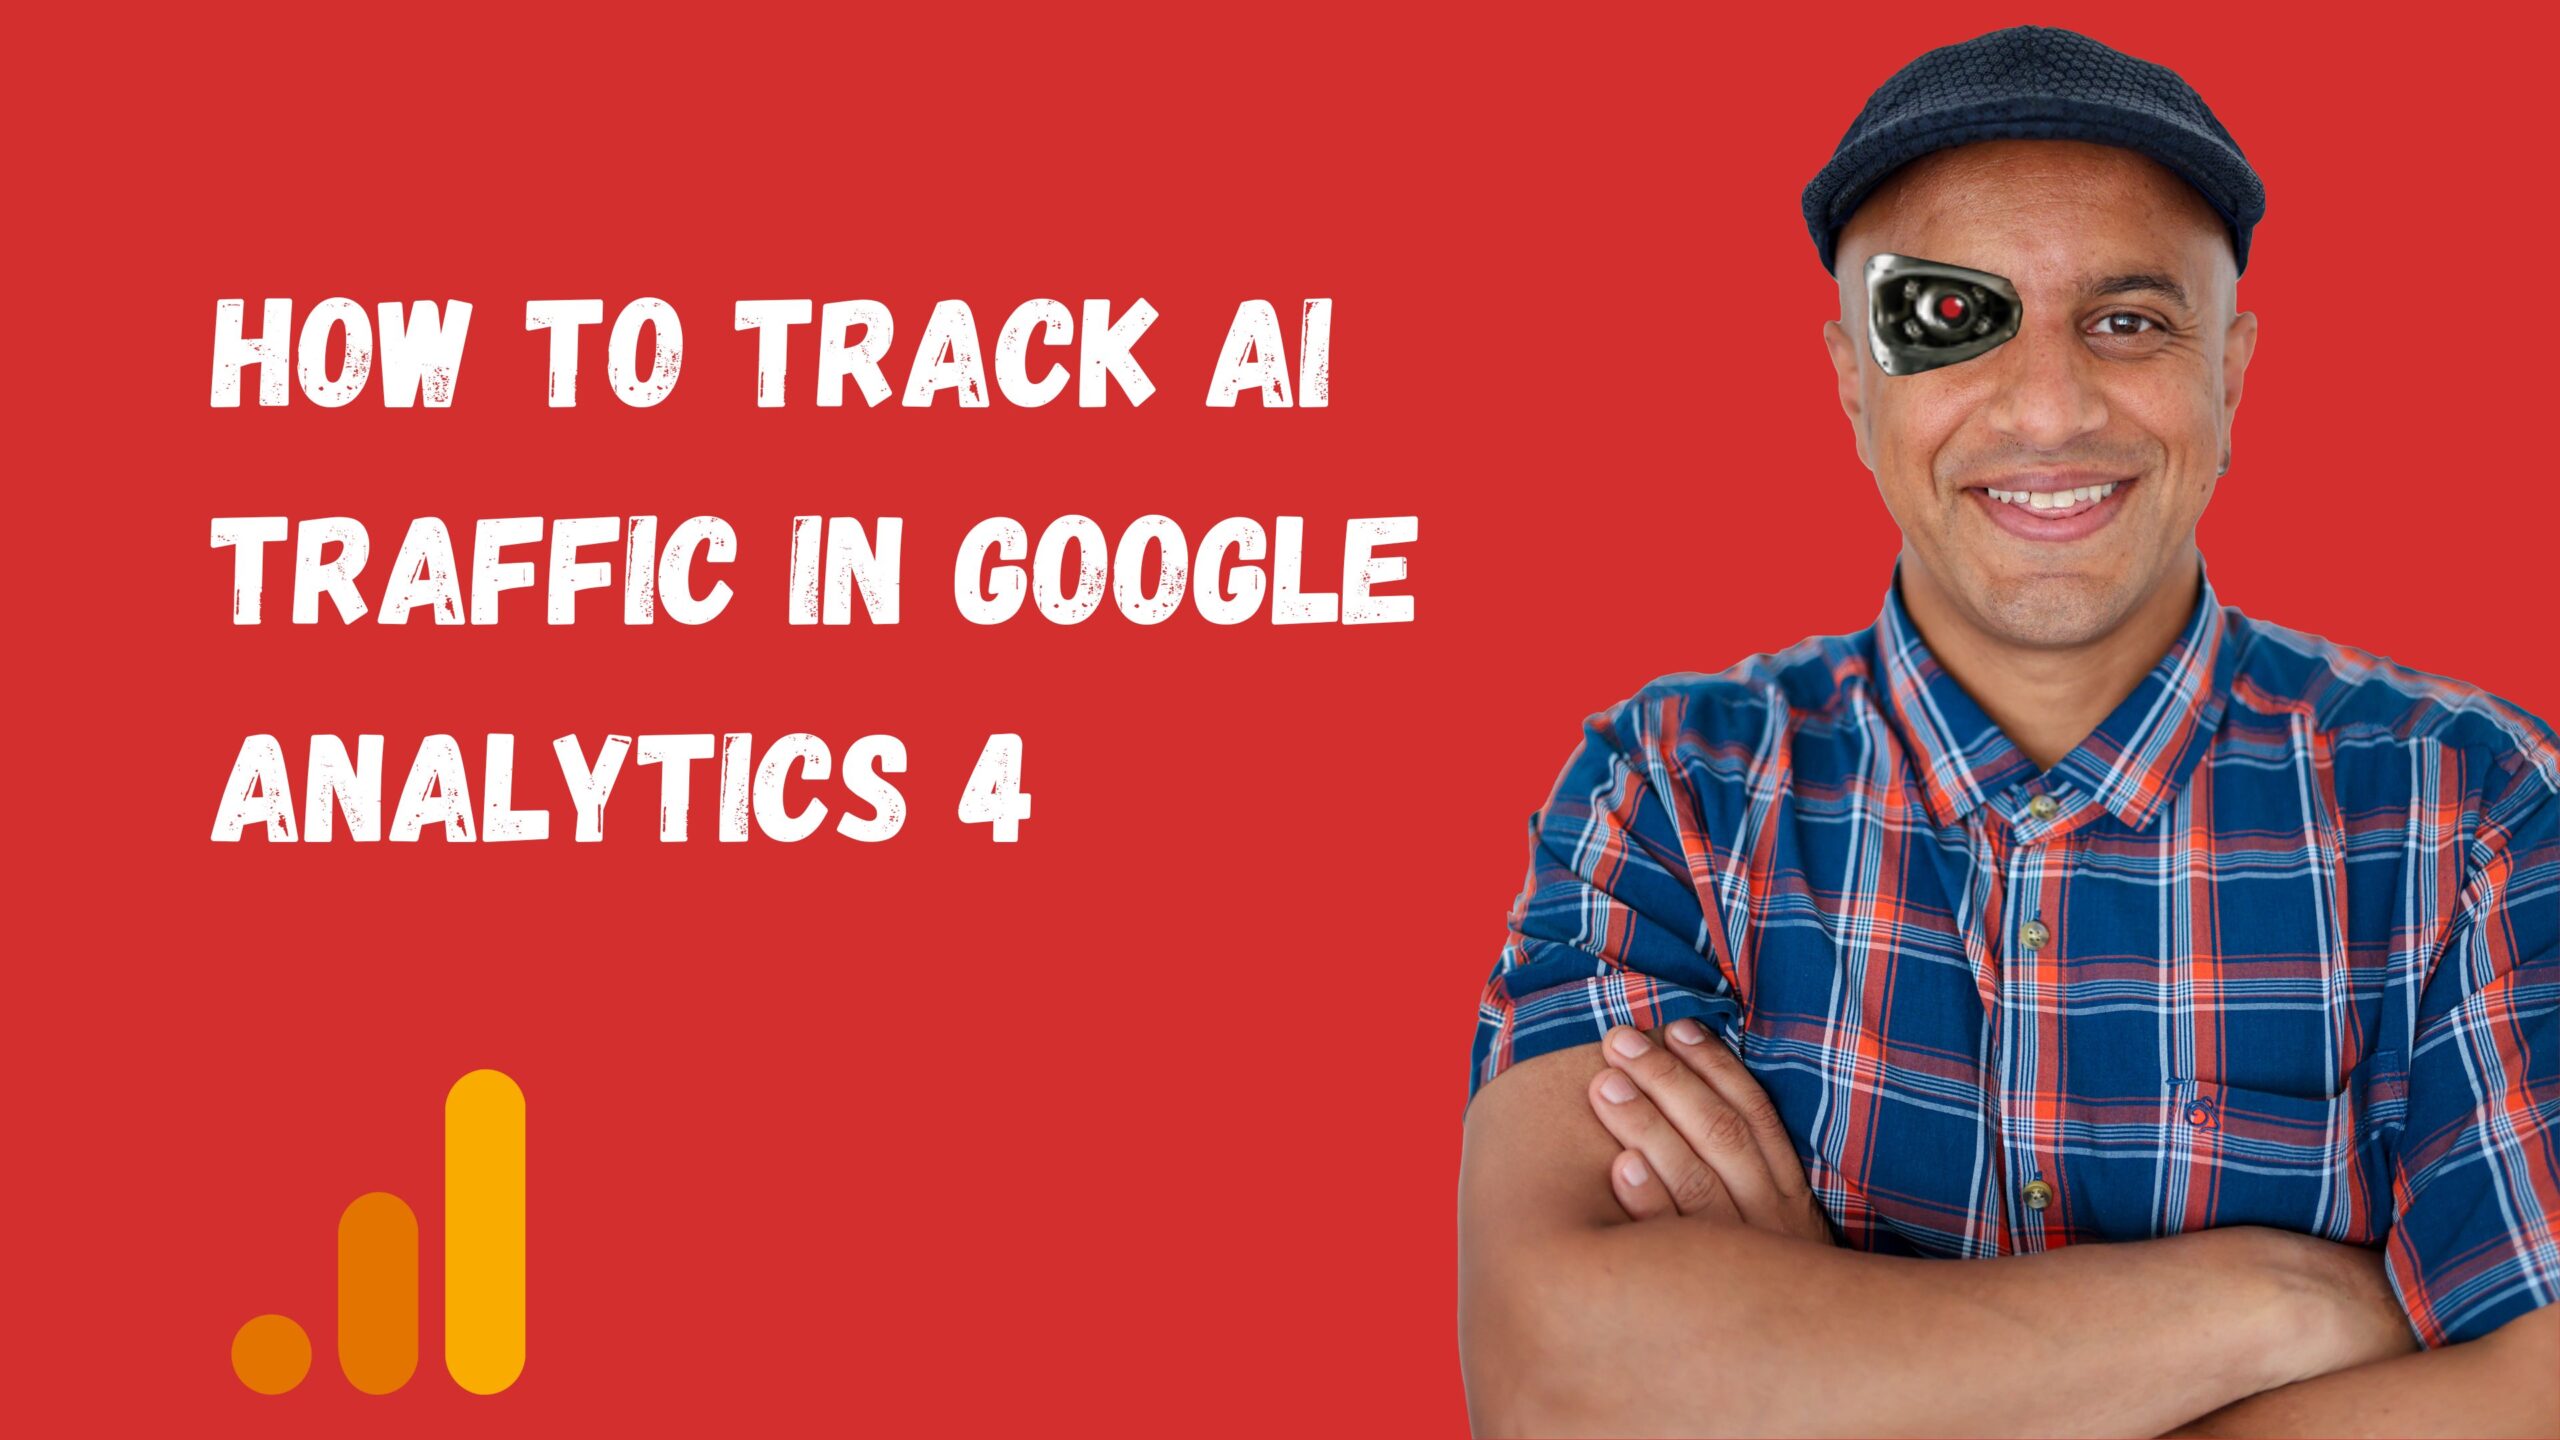 How to track AI traffic in Google analytics 4